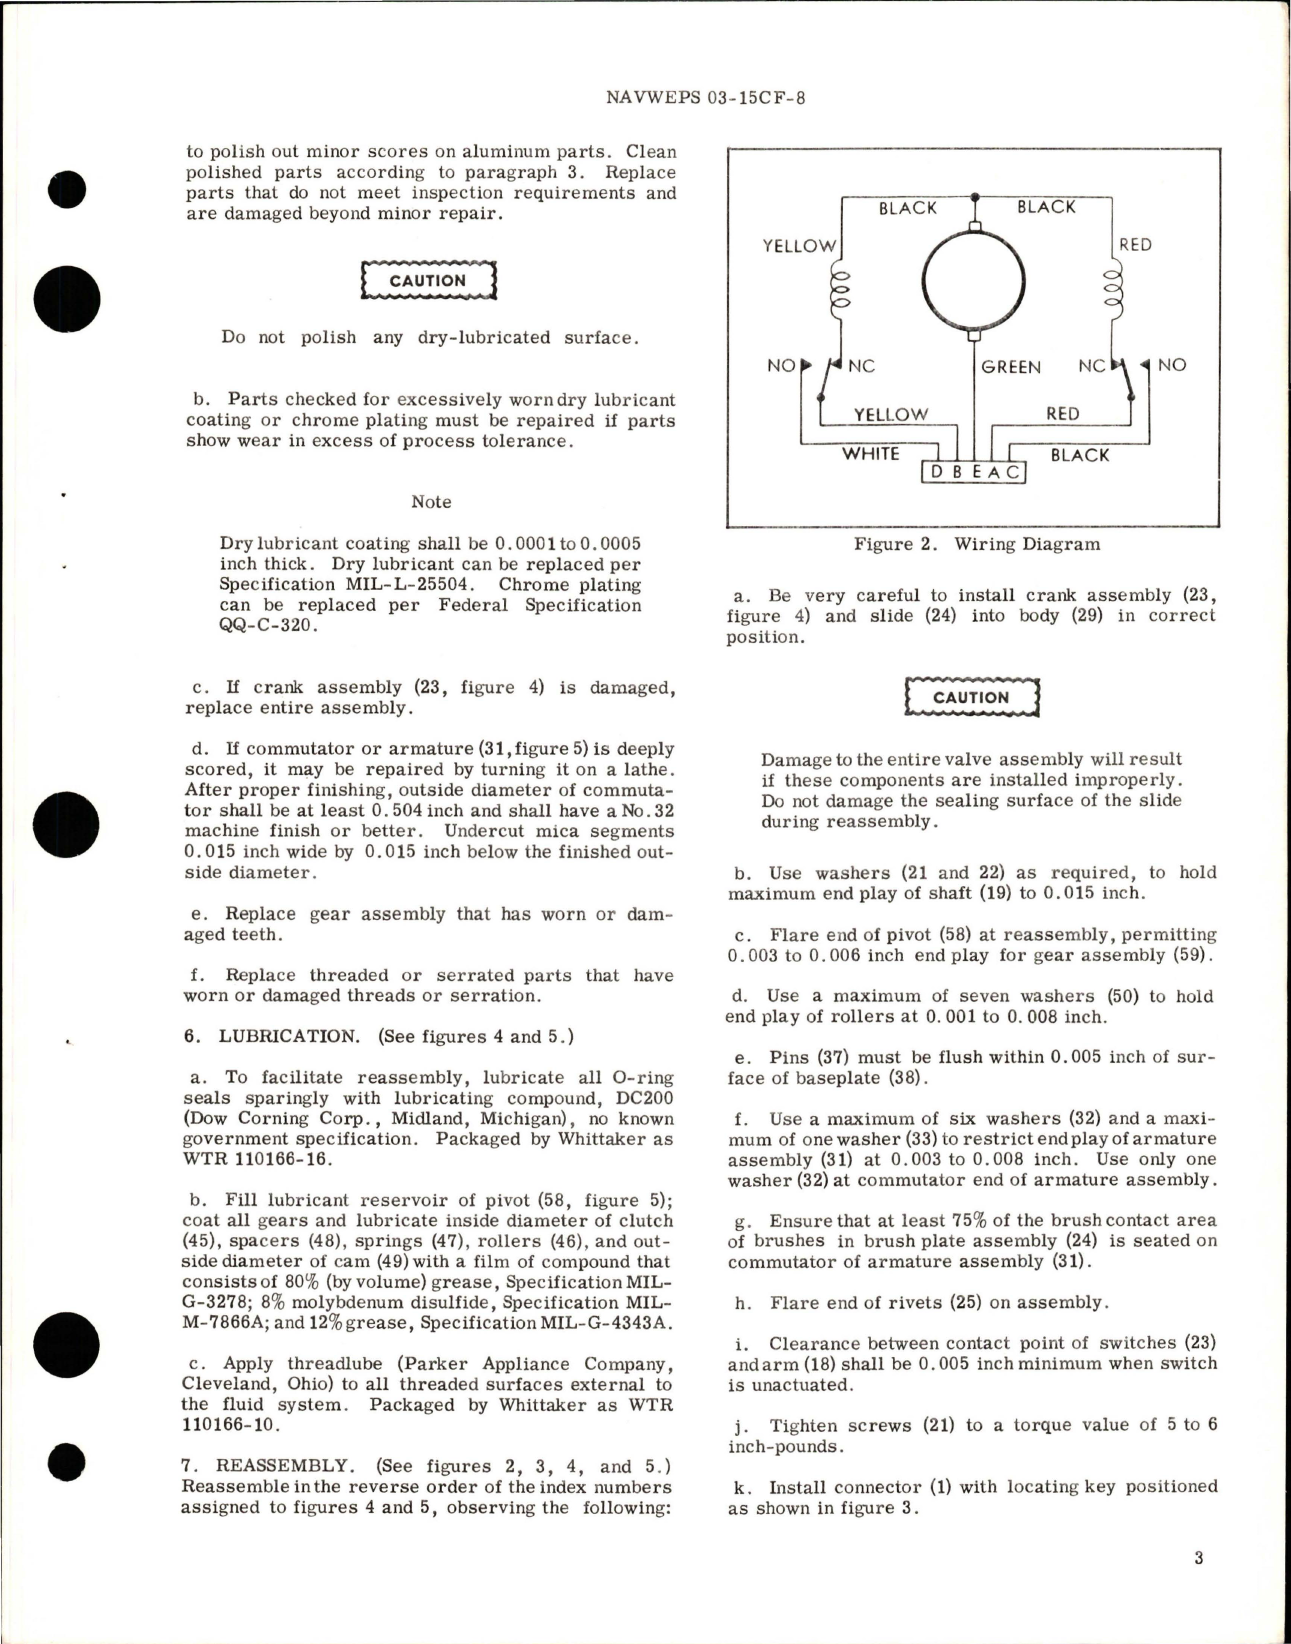 Sample page 5 from AirCorps Library document: Overhaul Instructions with Illustrated Parts Breakdown for Motor Actuated Gate Shutoff Valve - Part 134415-5